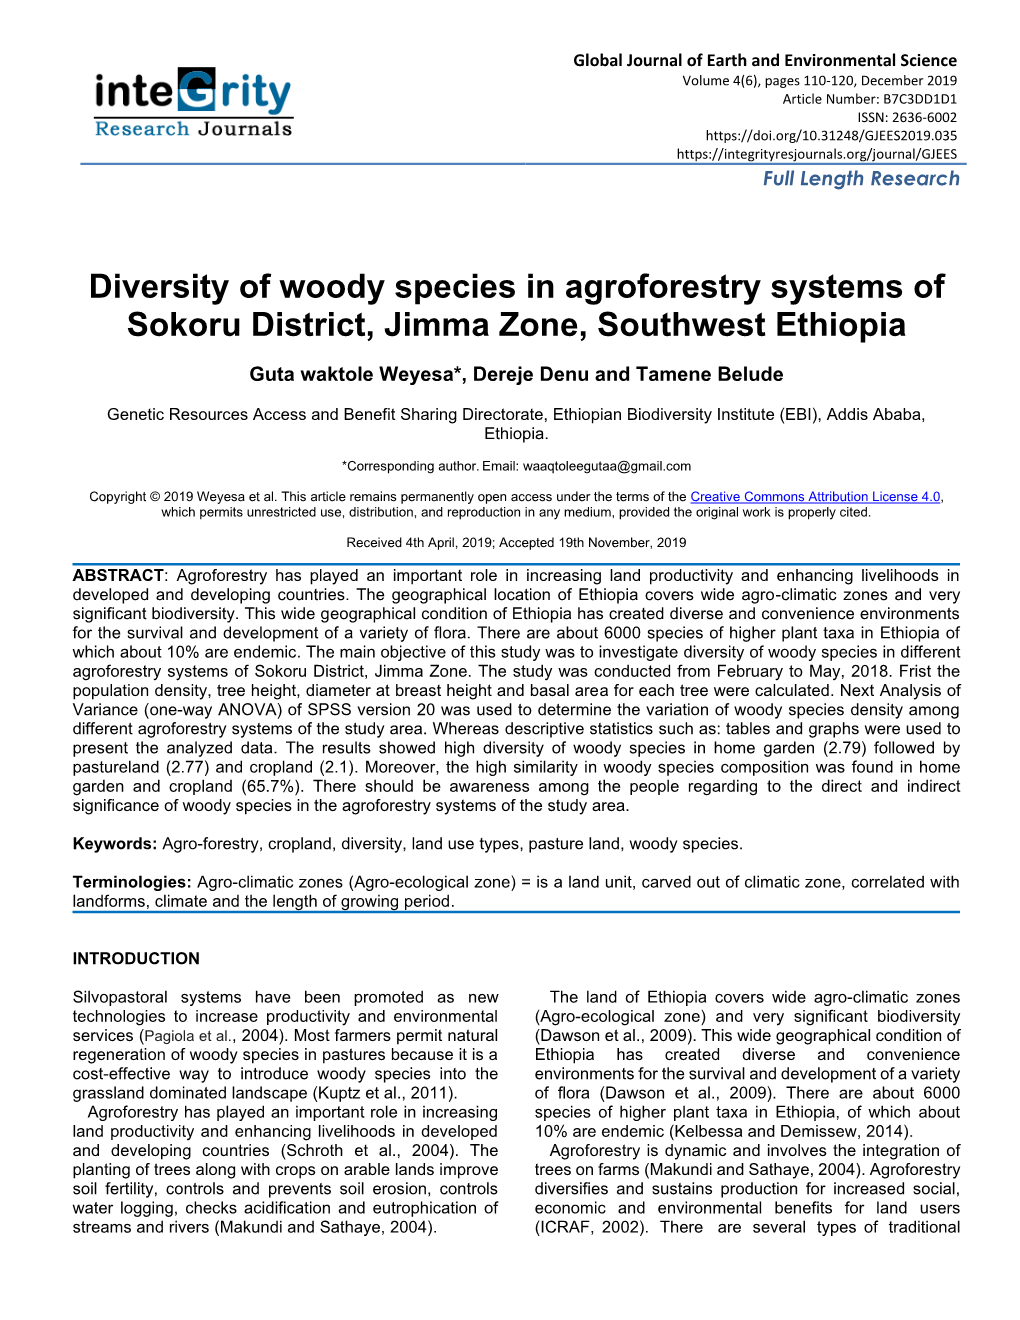 Diversity of Woody Species in Agroforestry Systems of Sokoru District, Jimma Zone, Southwest Ethiopia